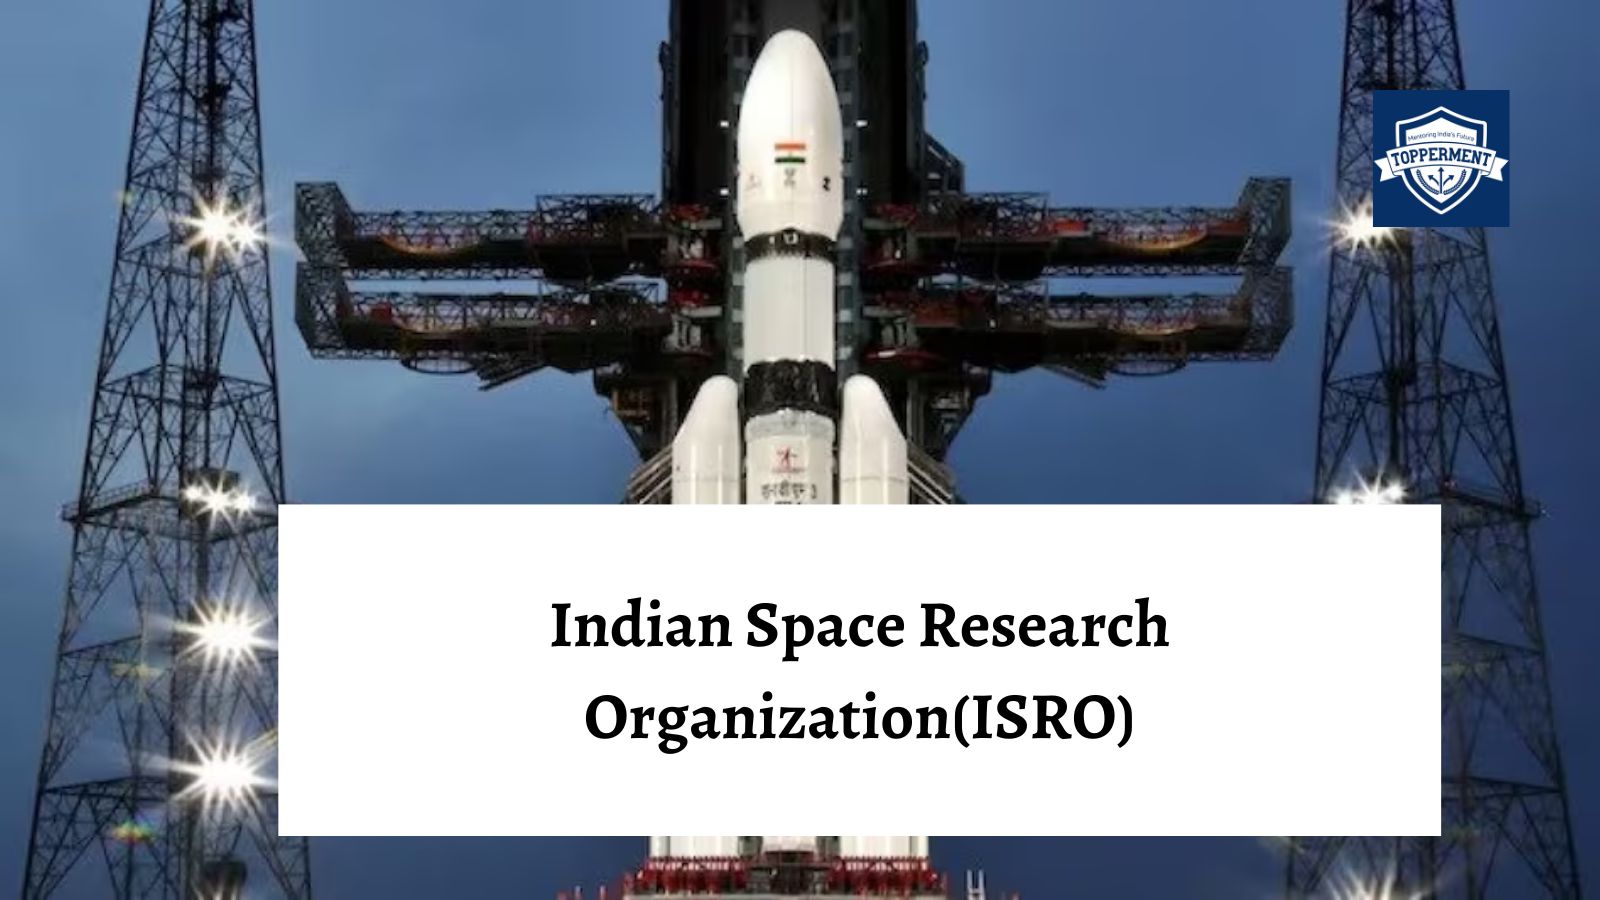 What Is Indian Space Research Organization(ISRO) And Its Objectives? -TopperMent